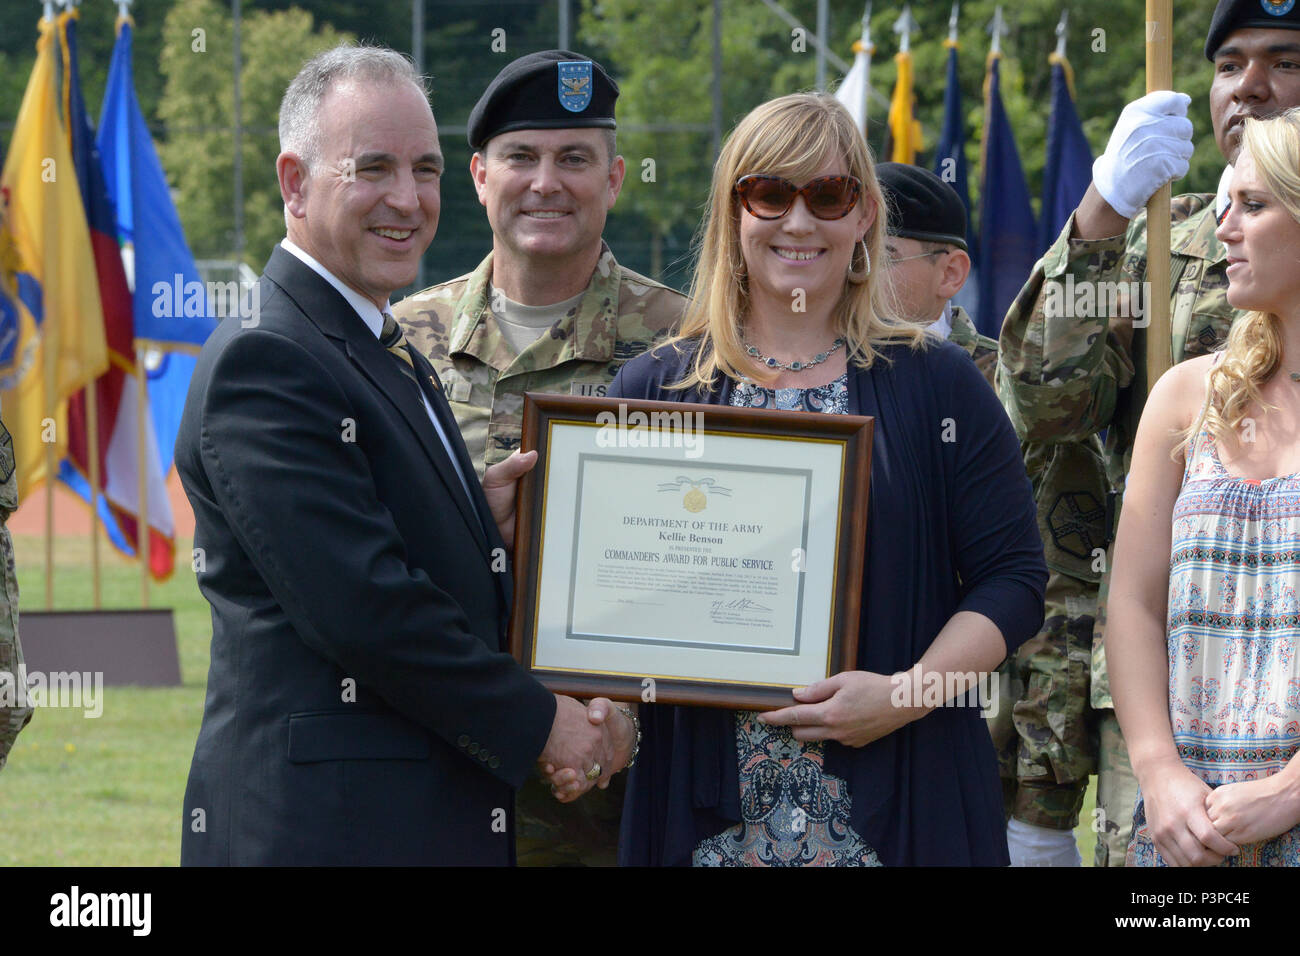 ANSBACH, Germany (July 21, 2016) – Michael D. Formica, director of Installation Management Command – Europe, thanks Kelly Benson, wife of outgoing U.S. Army Garrison Ansbach commander Col. Christopher M. Benson, during the garrison’s change of command ceremony Monday at Barton Barracks here.. Stock Photo